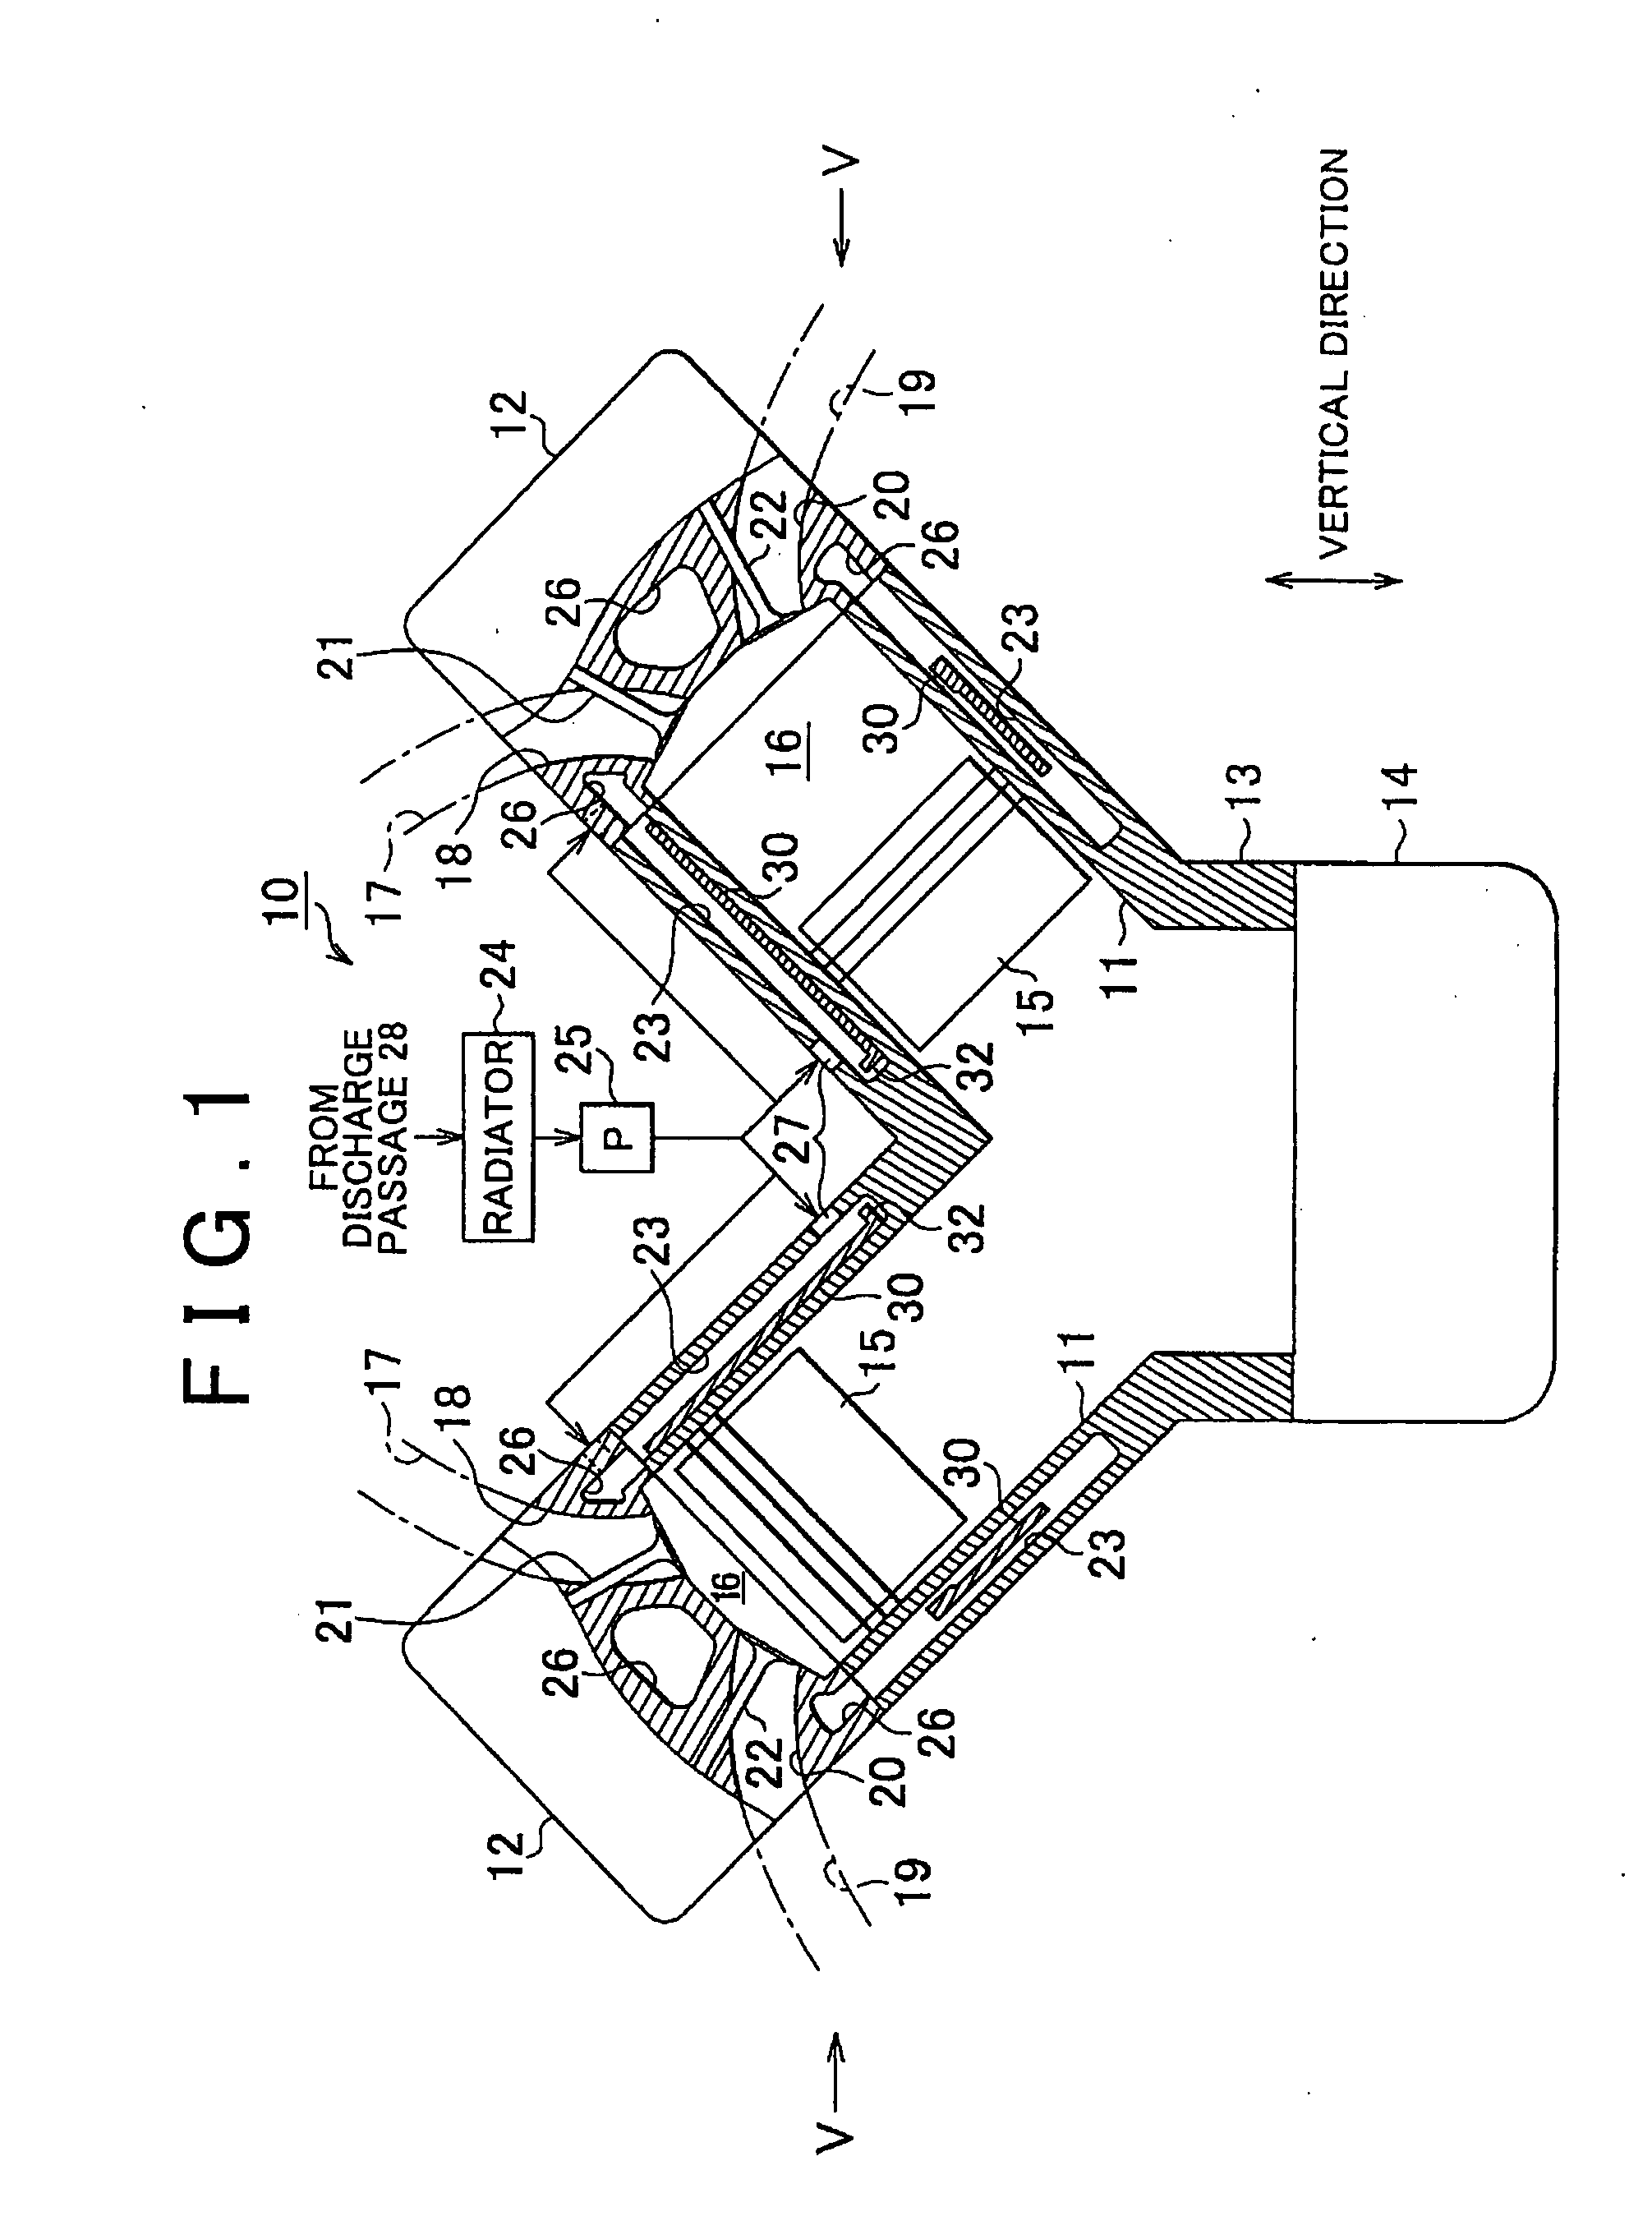 Cylinder block and internal combustion engine